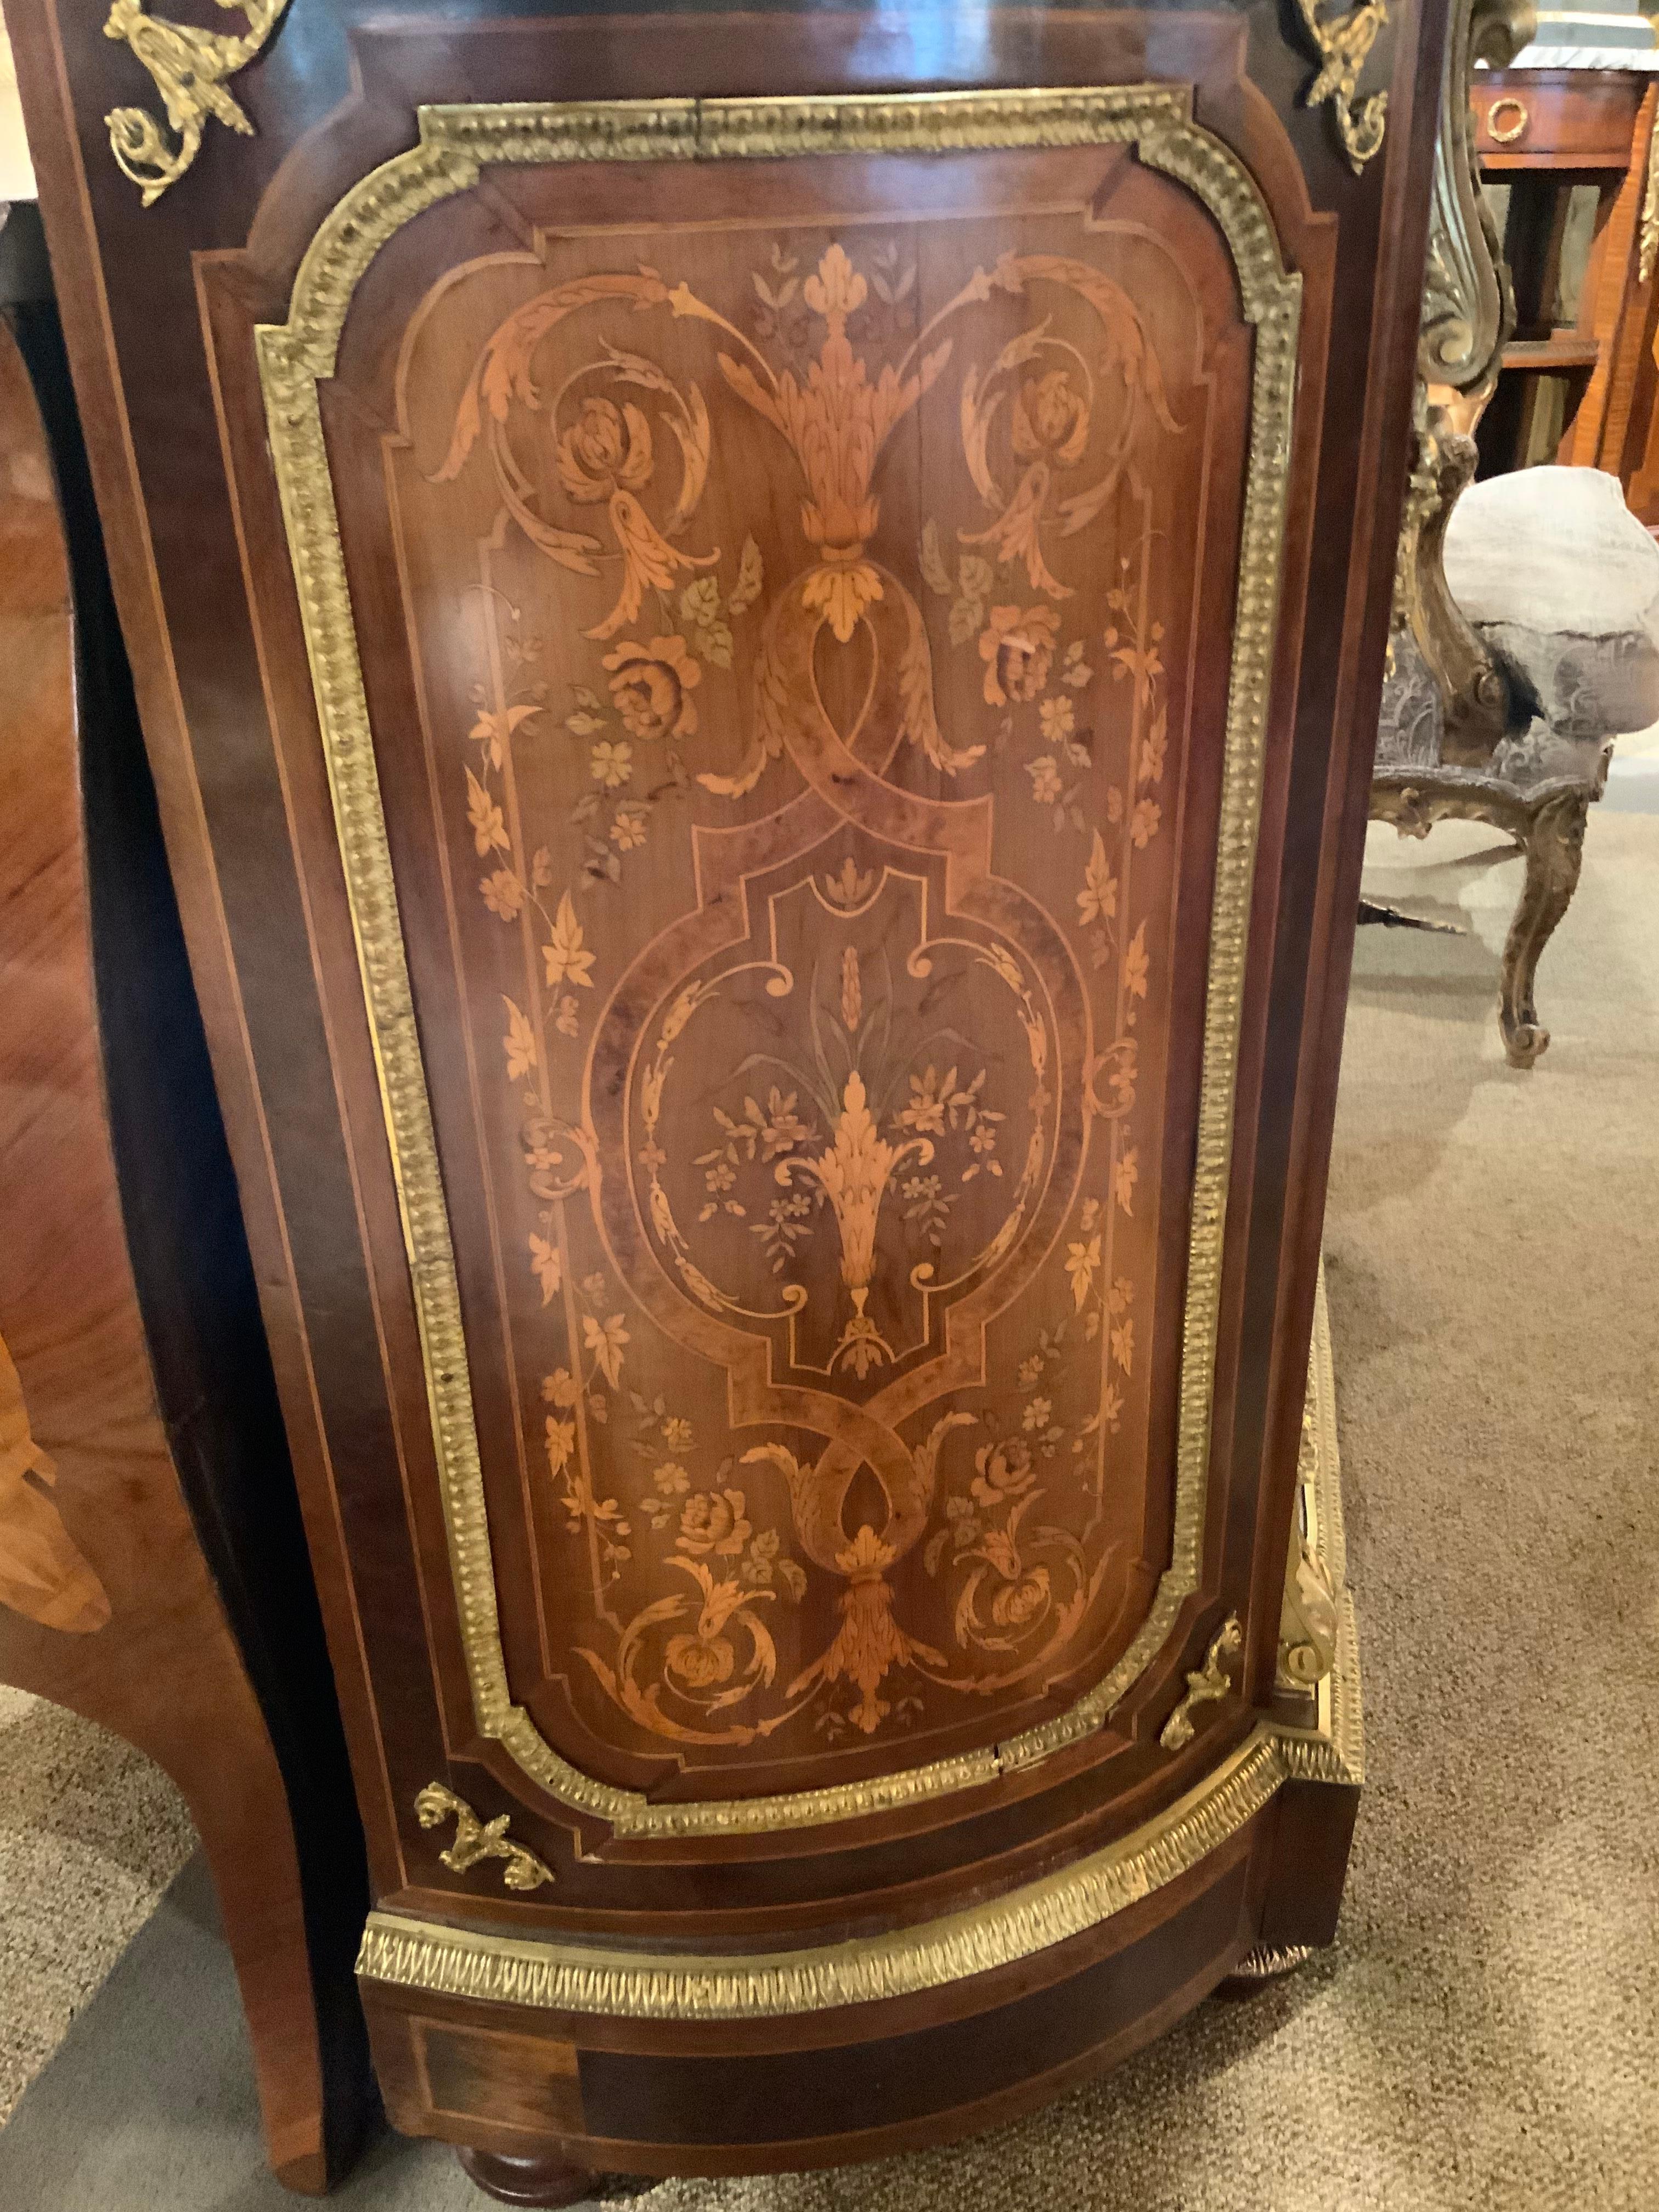 Mahogany French Louis XVI-Style Cabinet with Marquetry Inlay and Marble Top, 19th C.